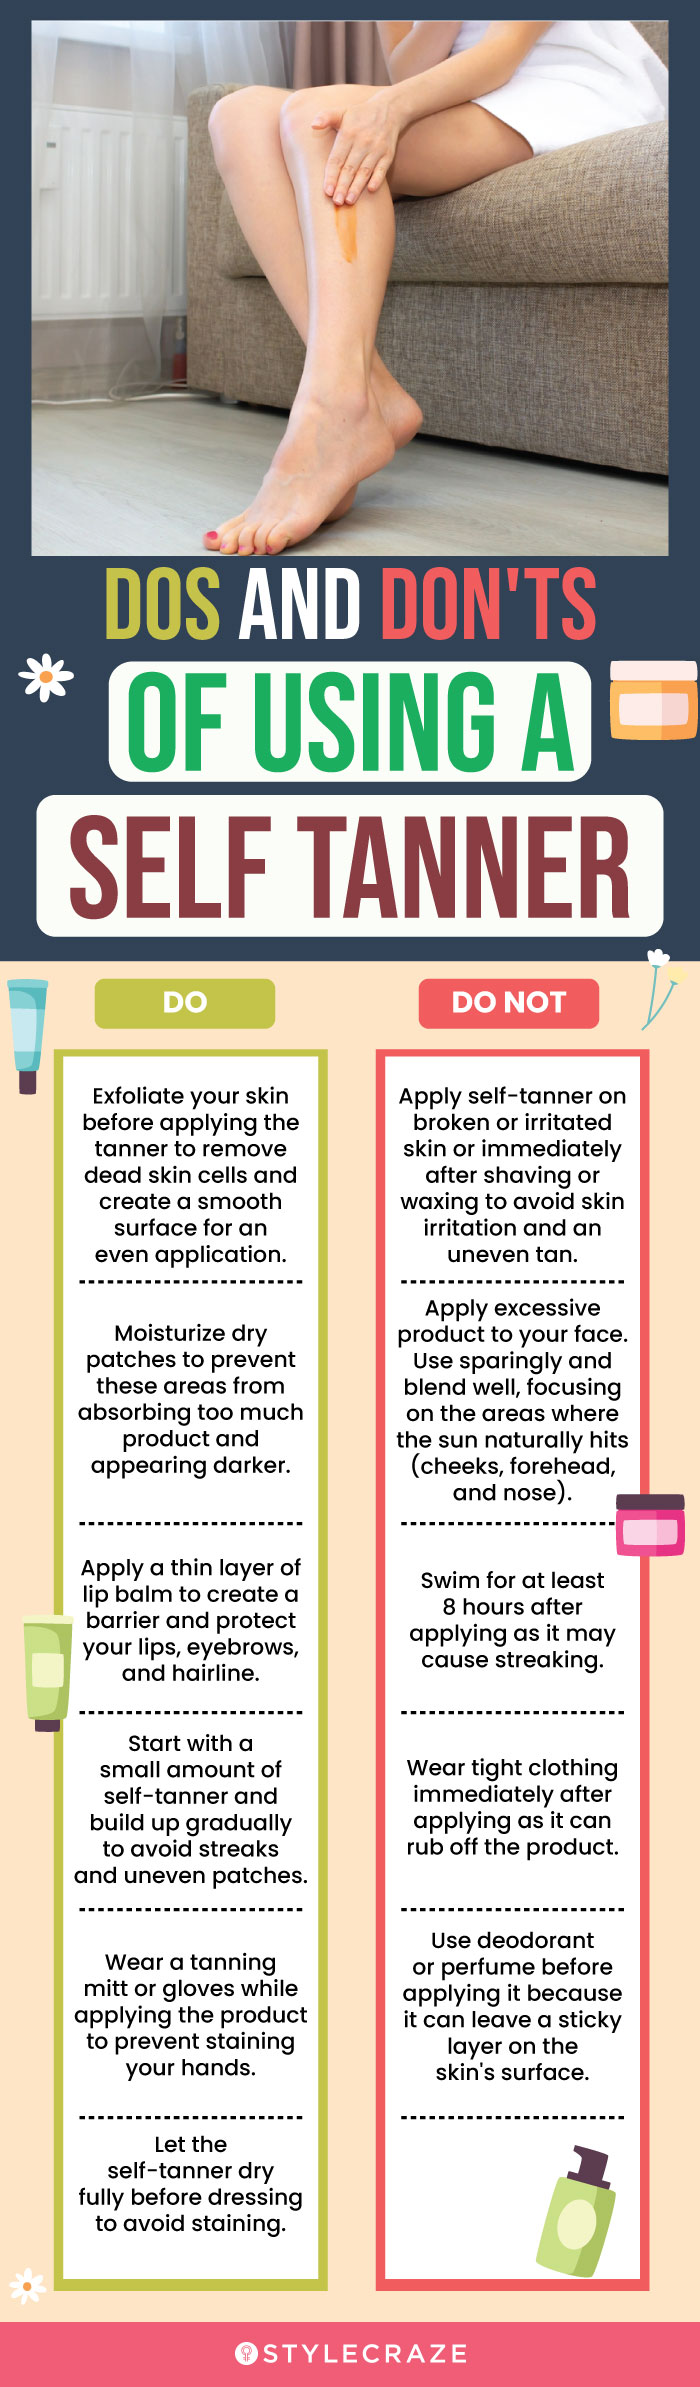 Dos And Don'ts Of Using A Self Tanner (infographic)